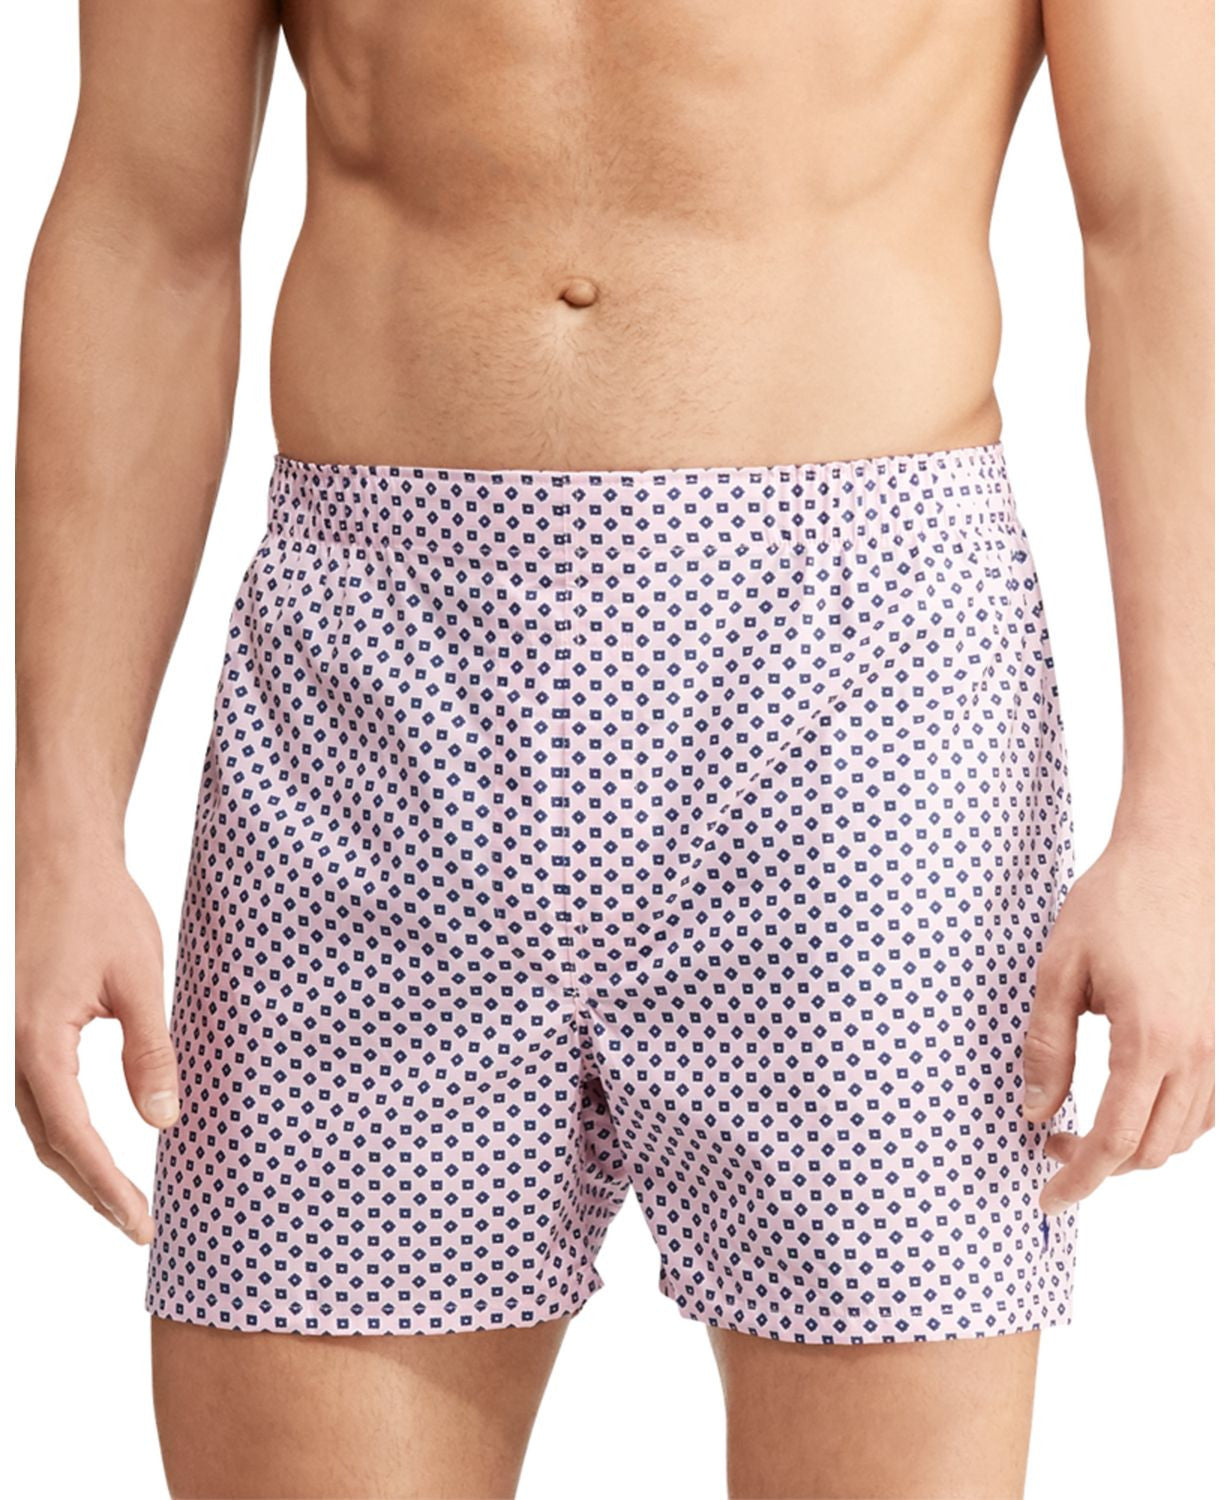 Polo Ralph Lauren Patterned Classic Fit Boxers Pack Of 3 Pink/Blue